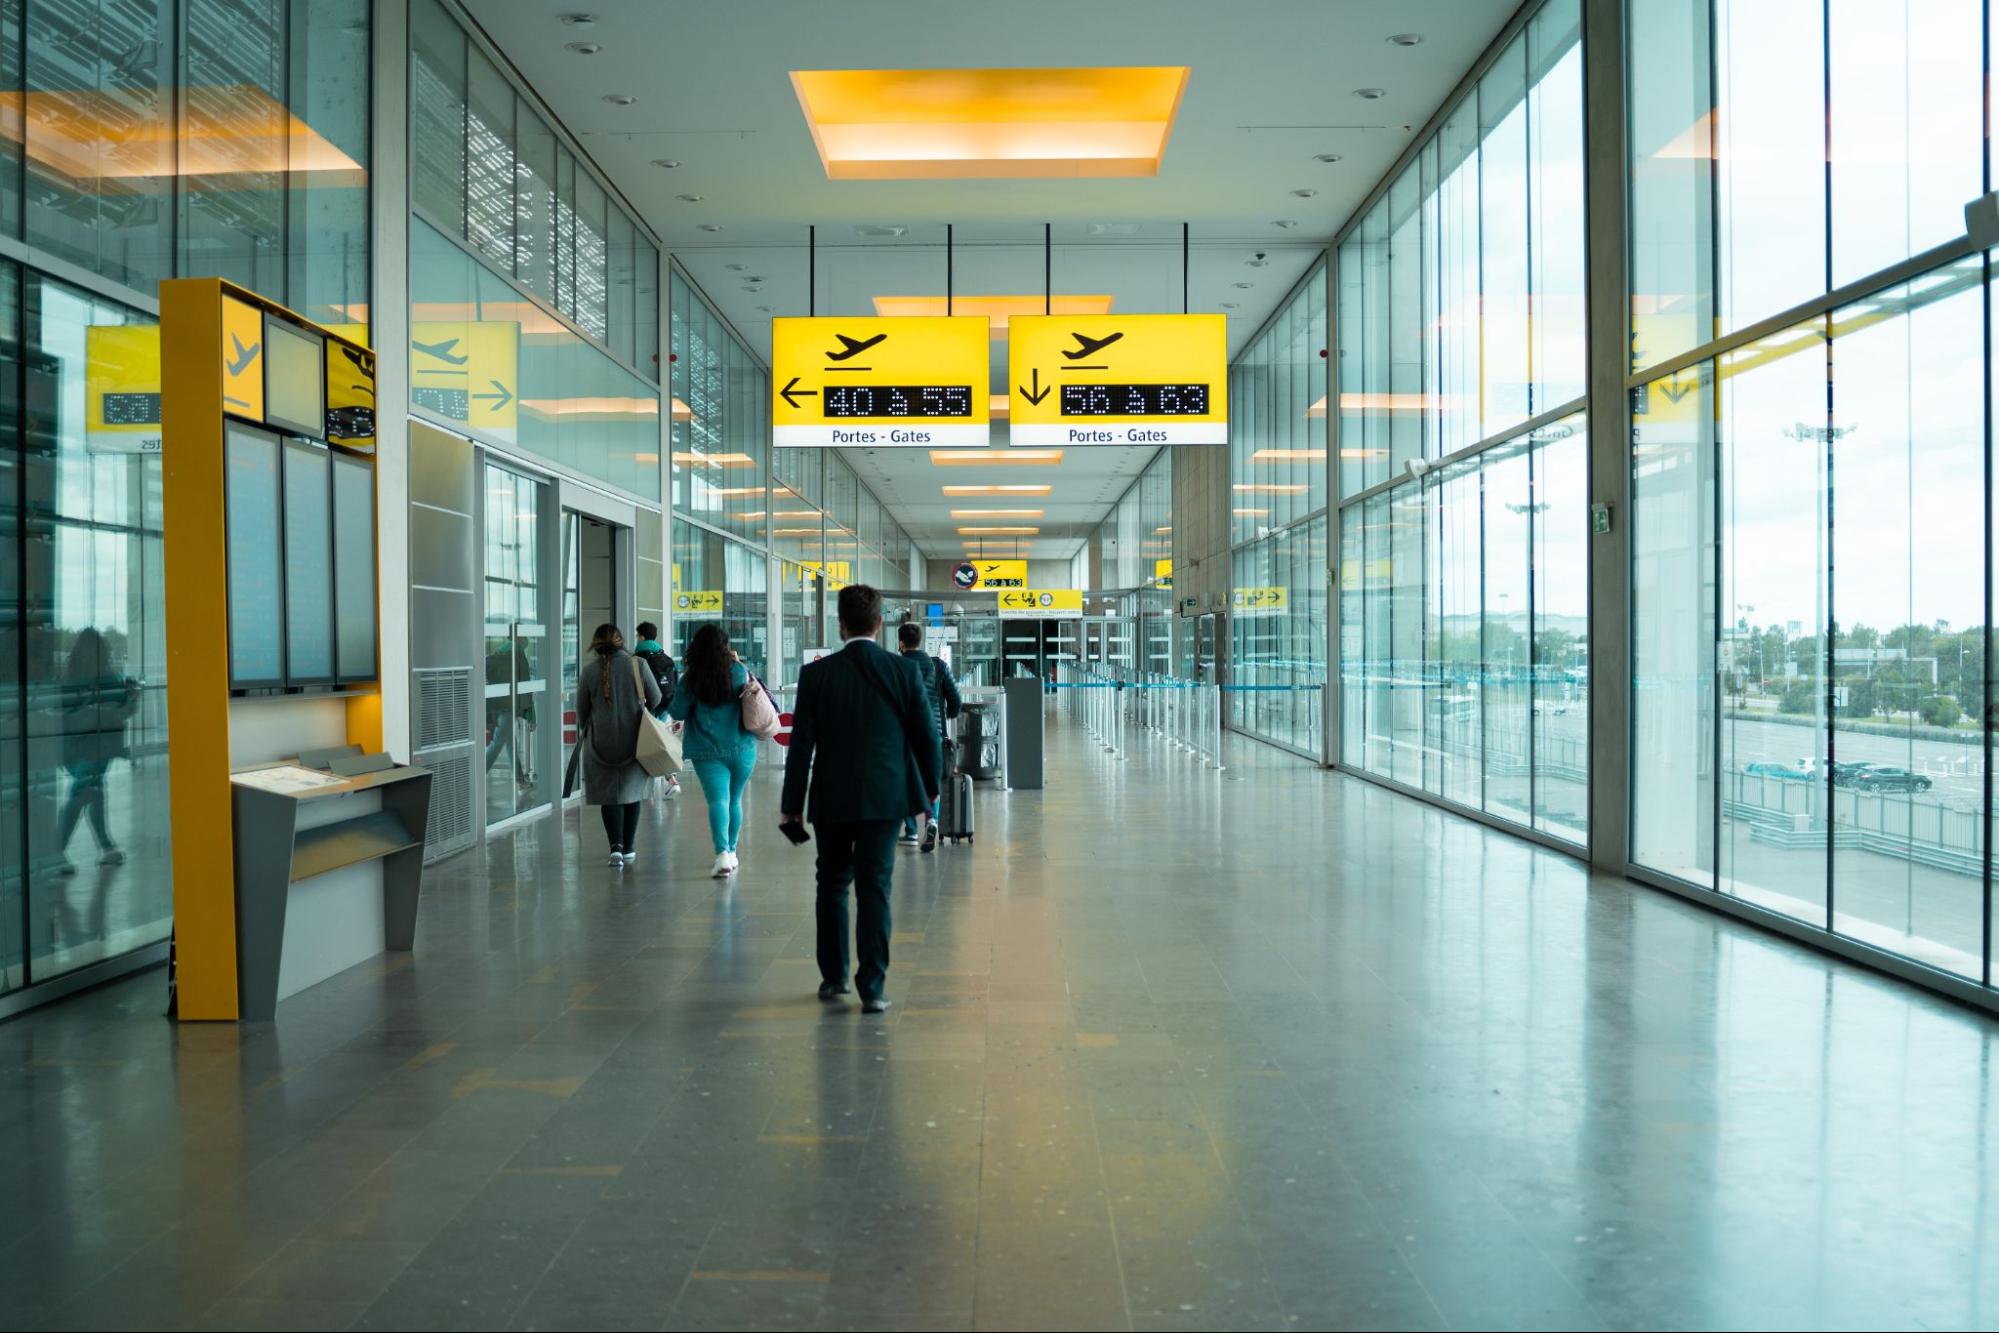 Stock image of people walking down an airport terminal hallway